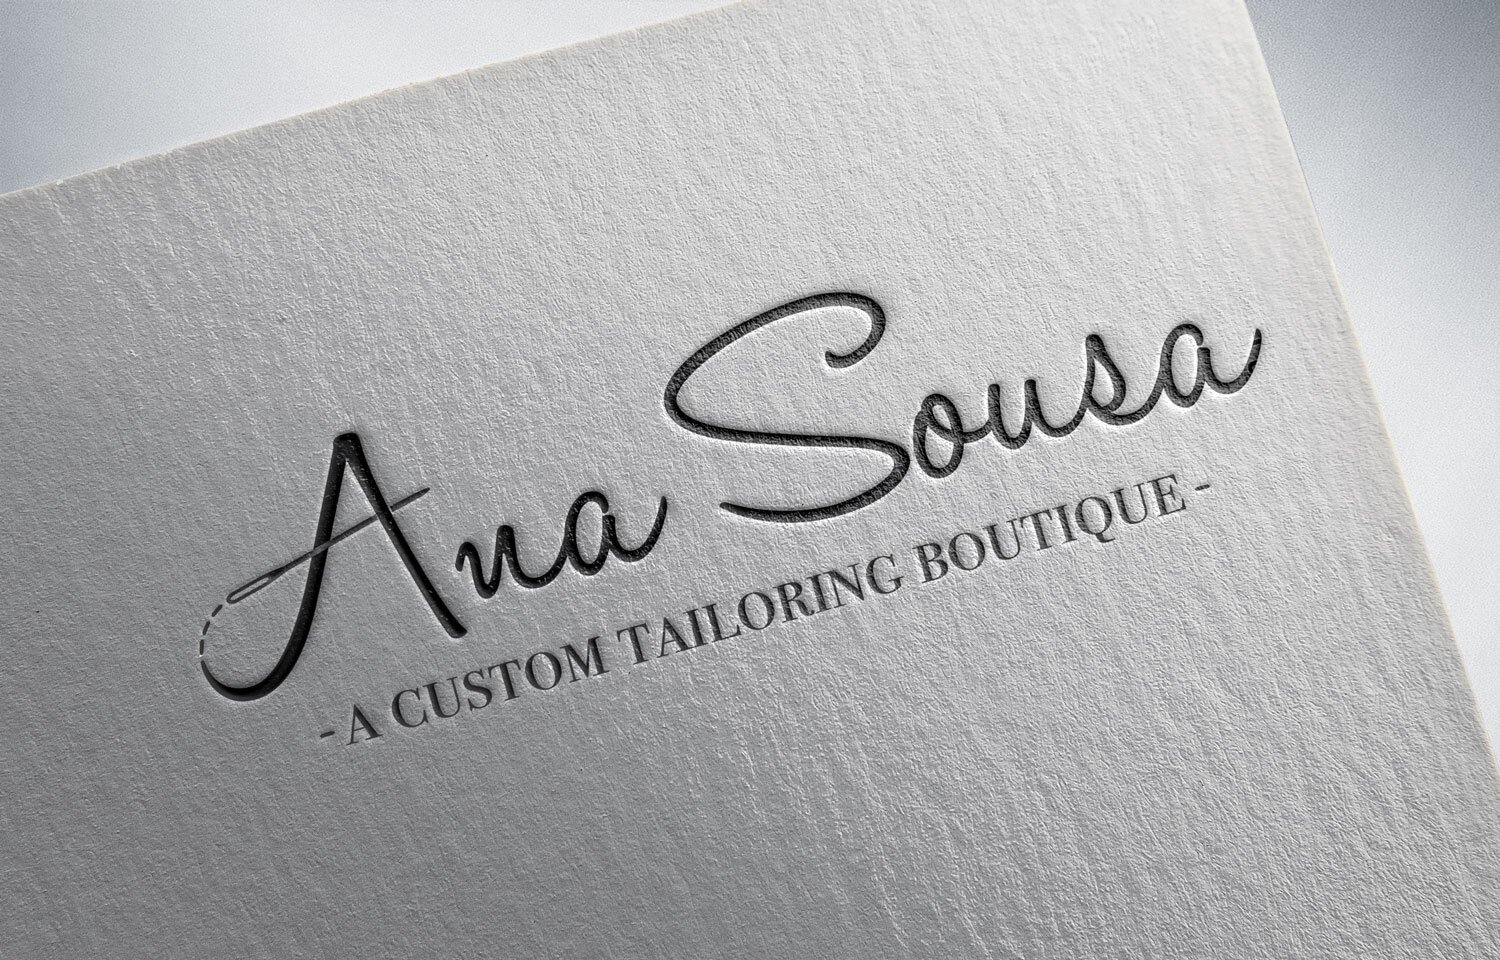  A custom logo design for Ana Sousa, a Custom Tailoring Boutique in a hand lettered font with the cross of the A appearing like stitches and a sewing needle threading it to form the capital letter A. 